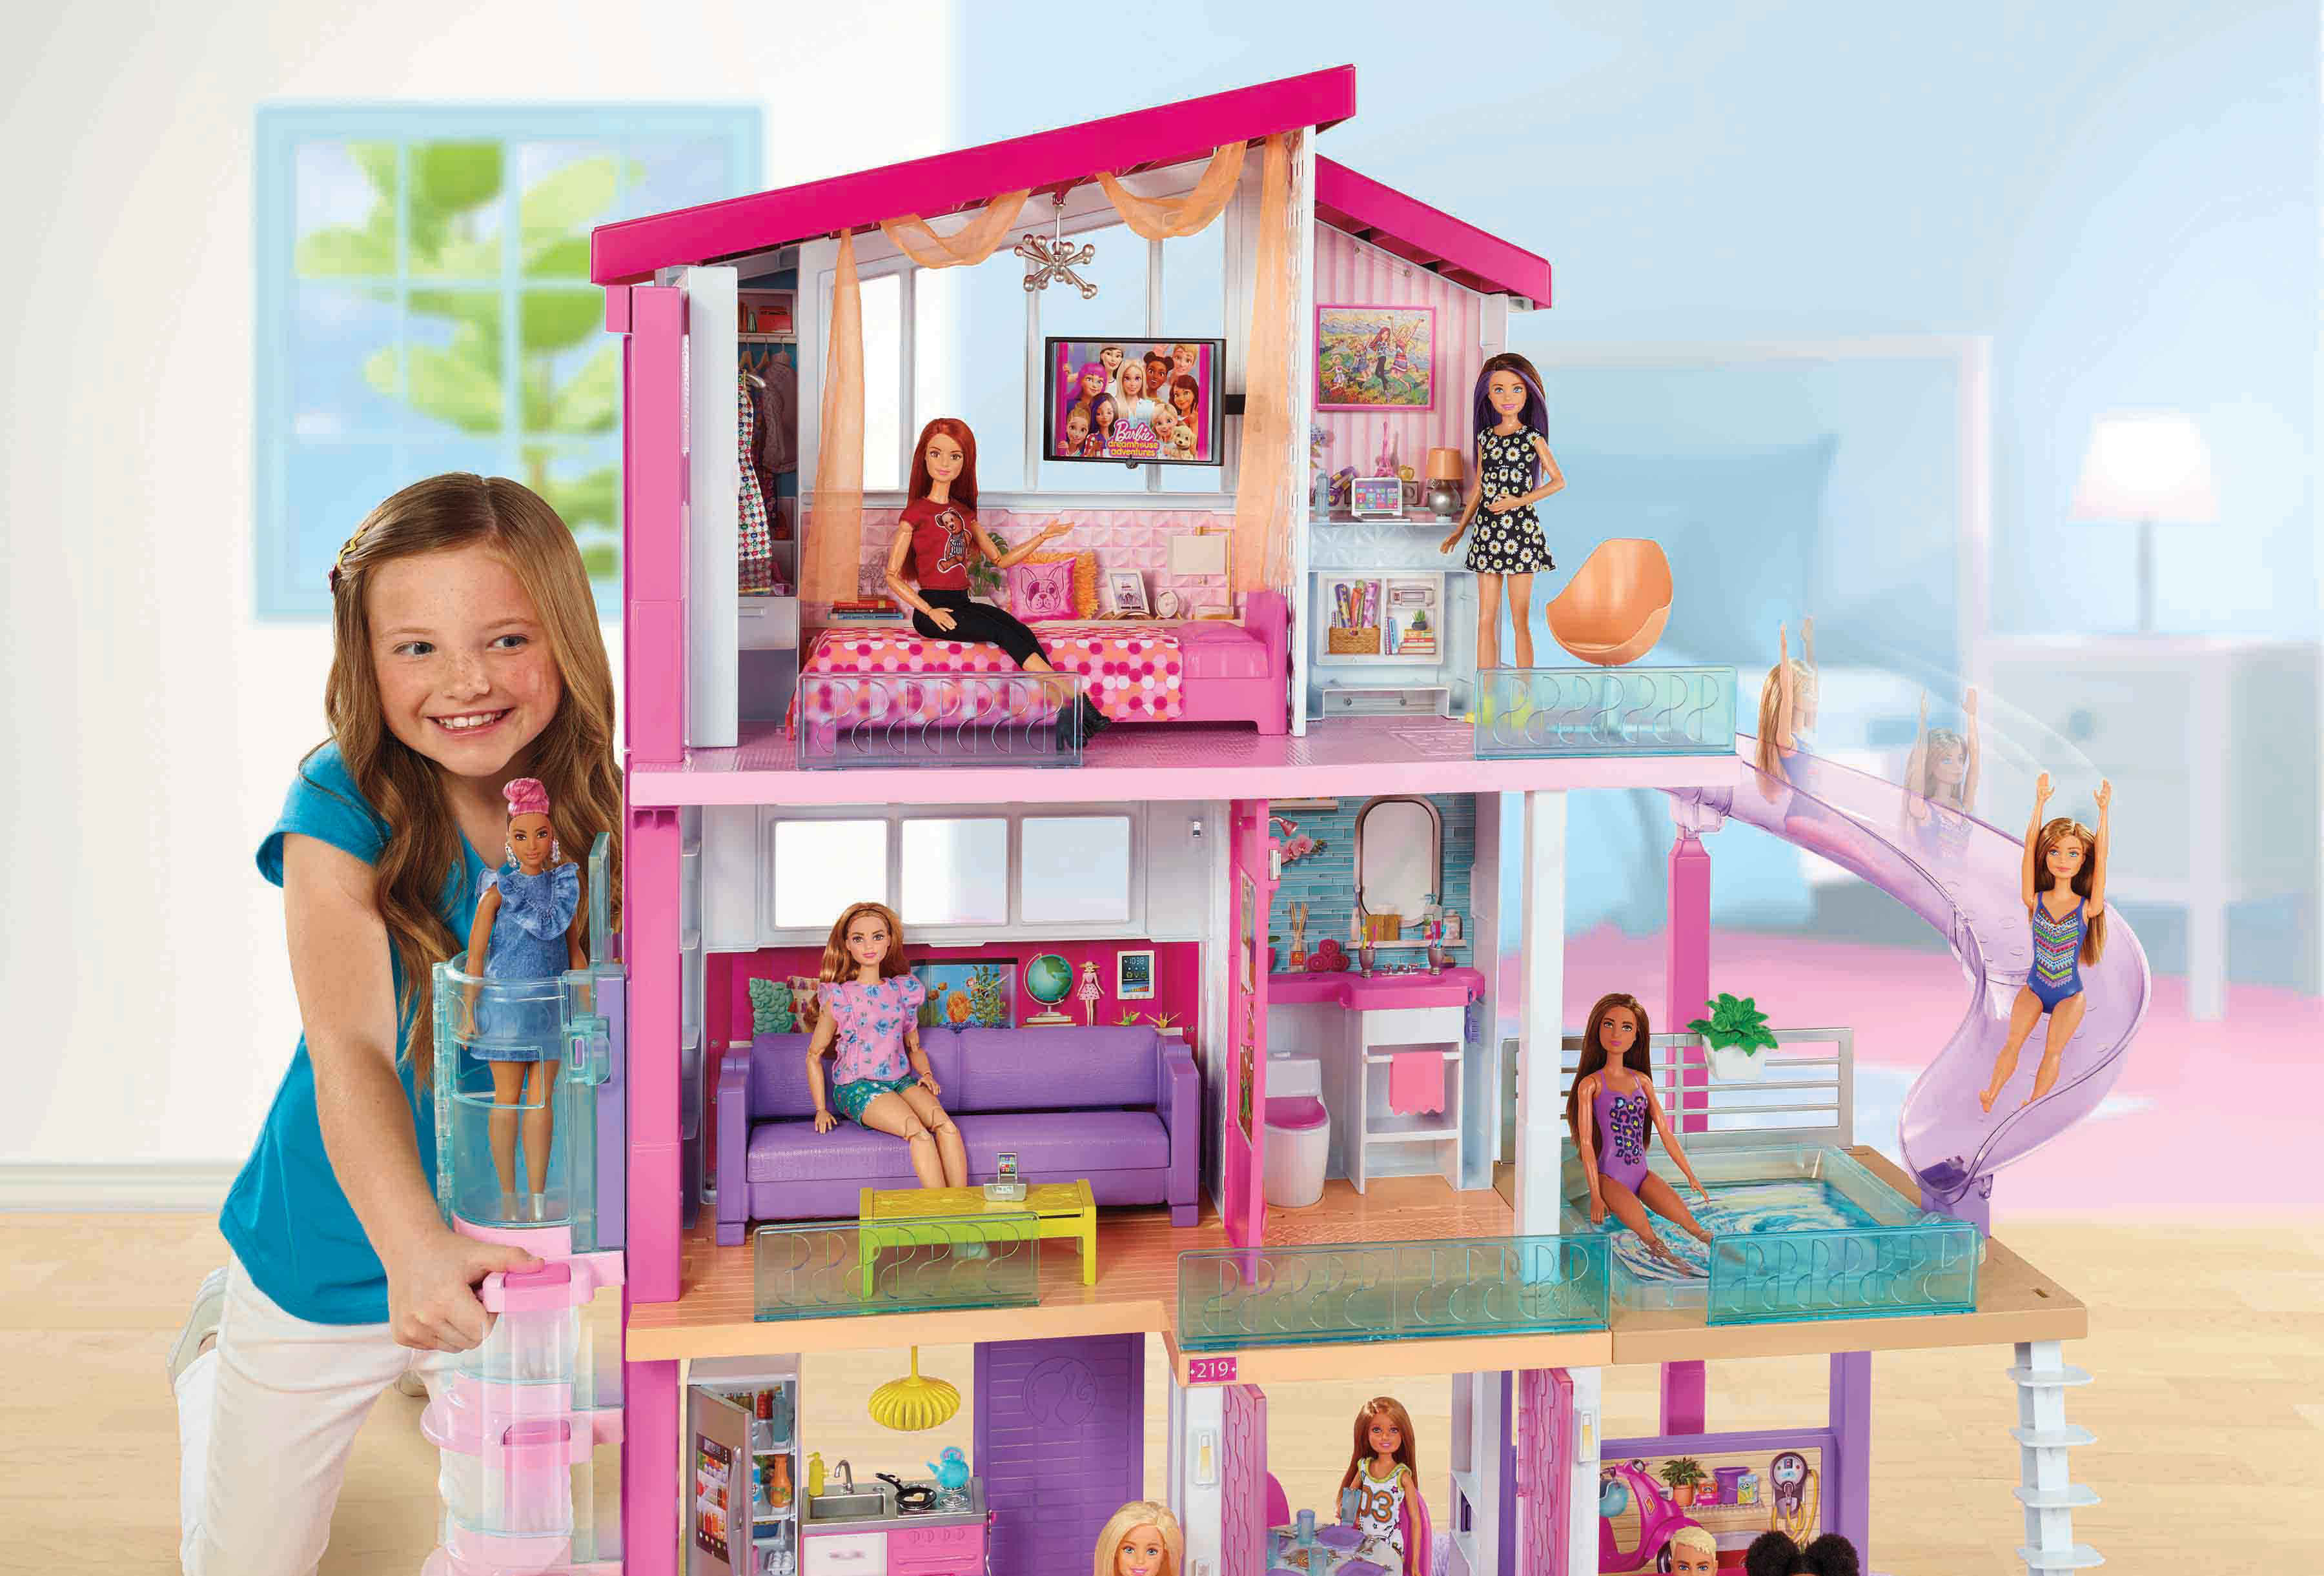 Barbie Dream House is the must-have 